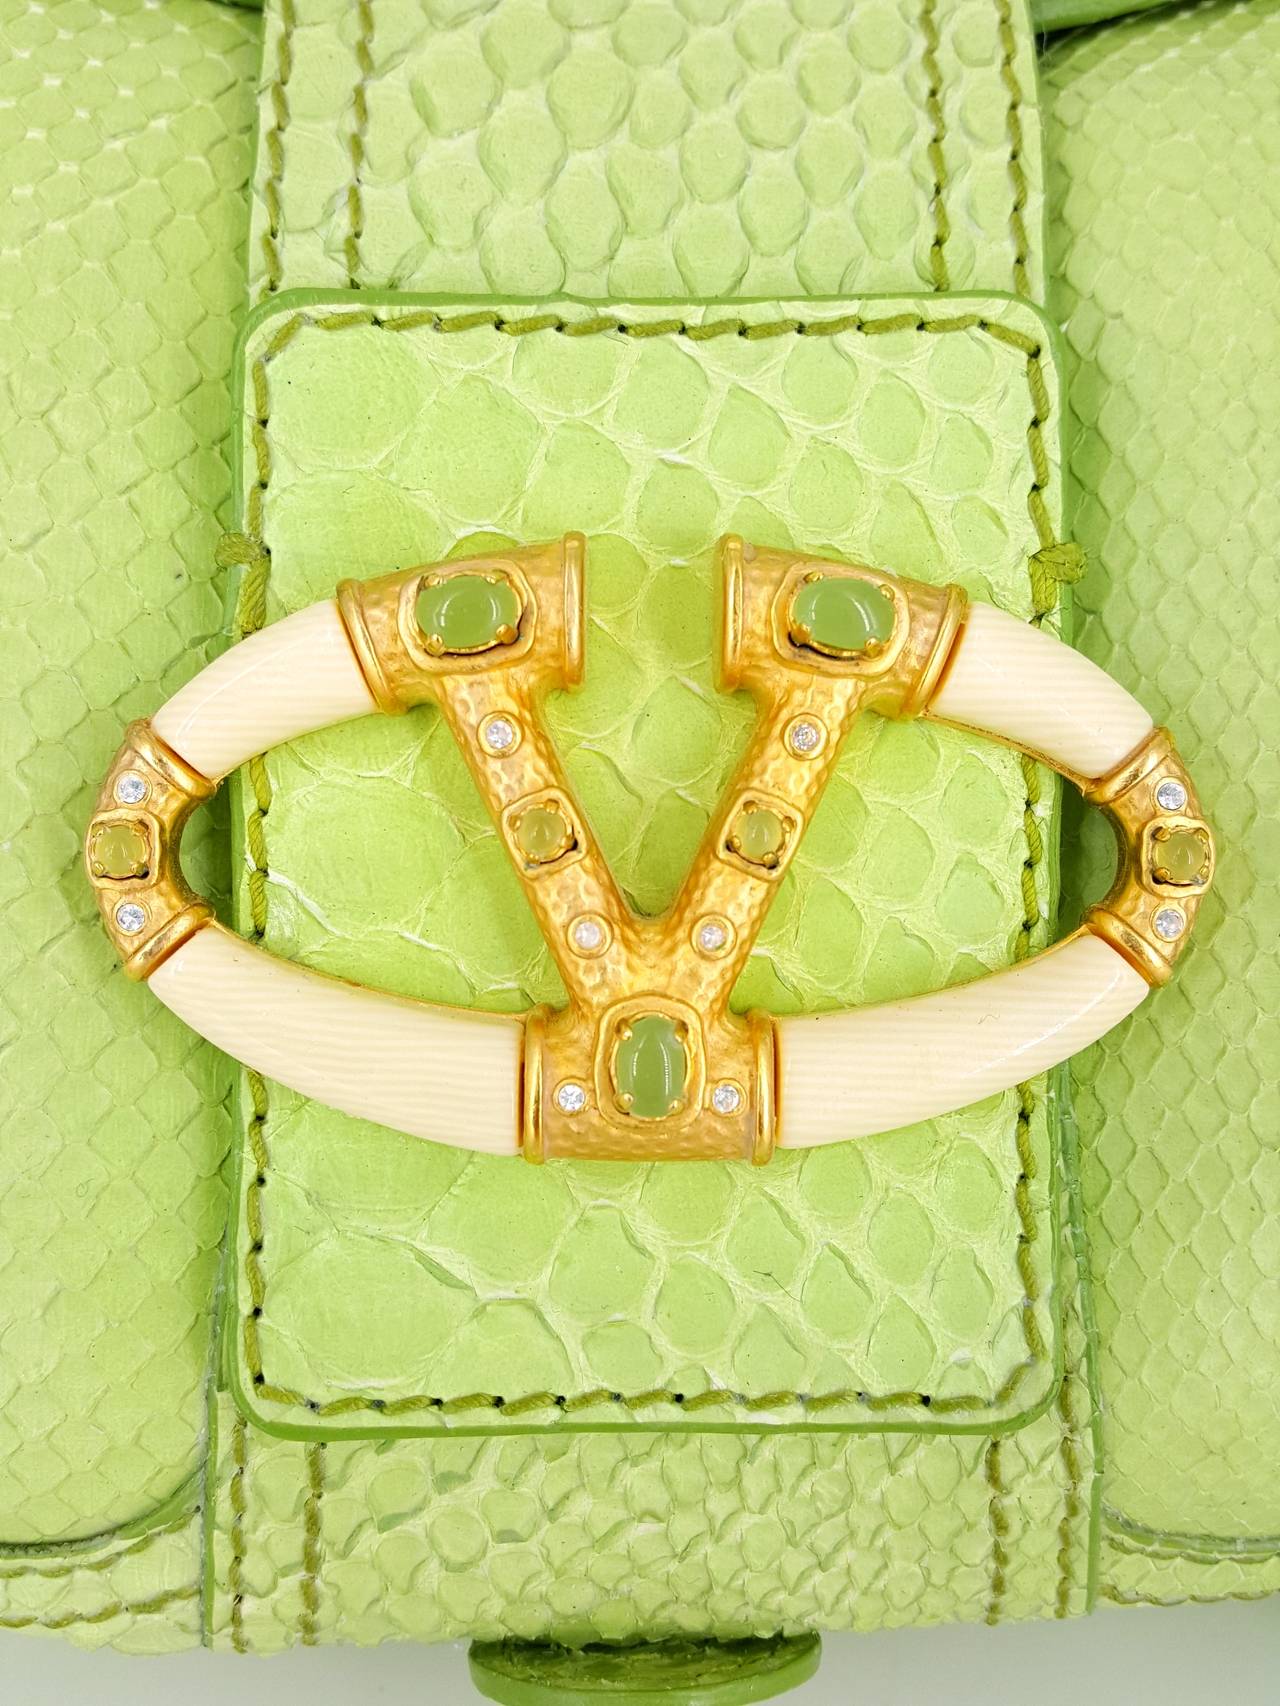 Offered for sale is the fabulous lime green Valentino Python Satchel with large faux ivory clasp embellished with jade.  This handbag has the original tags and was never carried.  The color is outstanding.  There is one large zippered  compartment